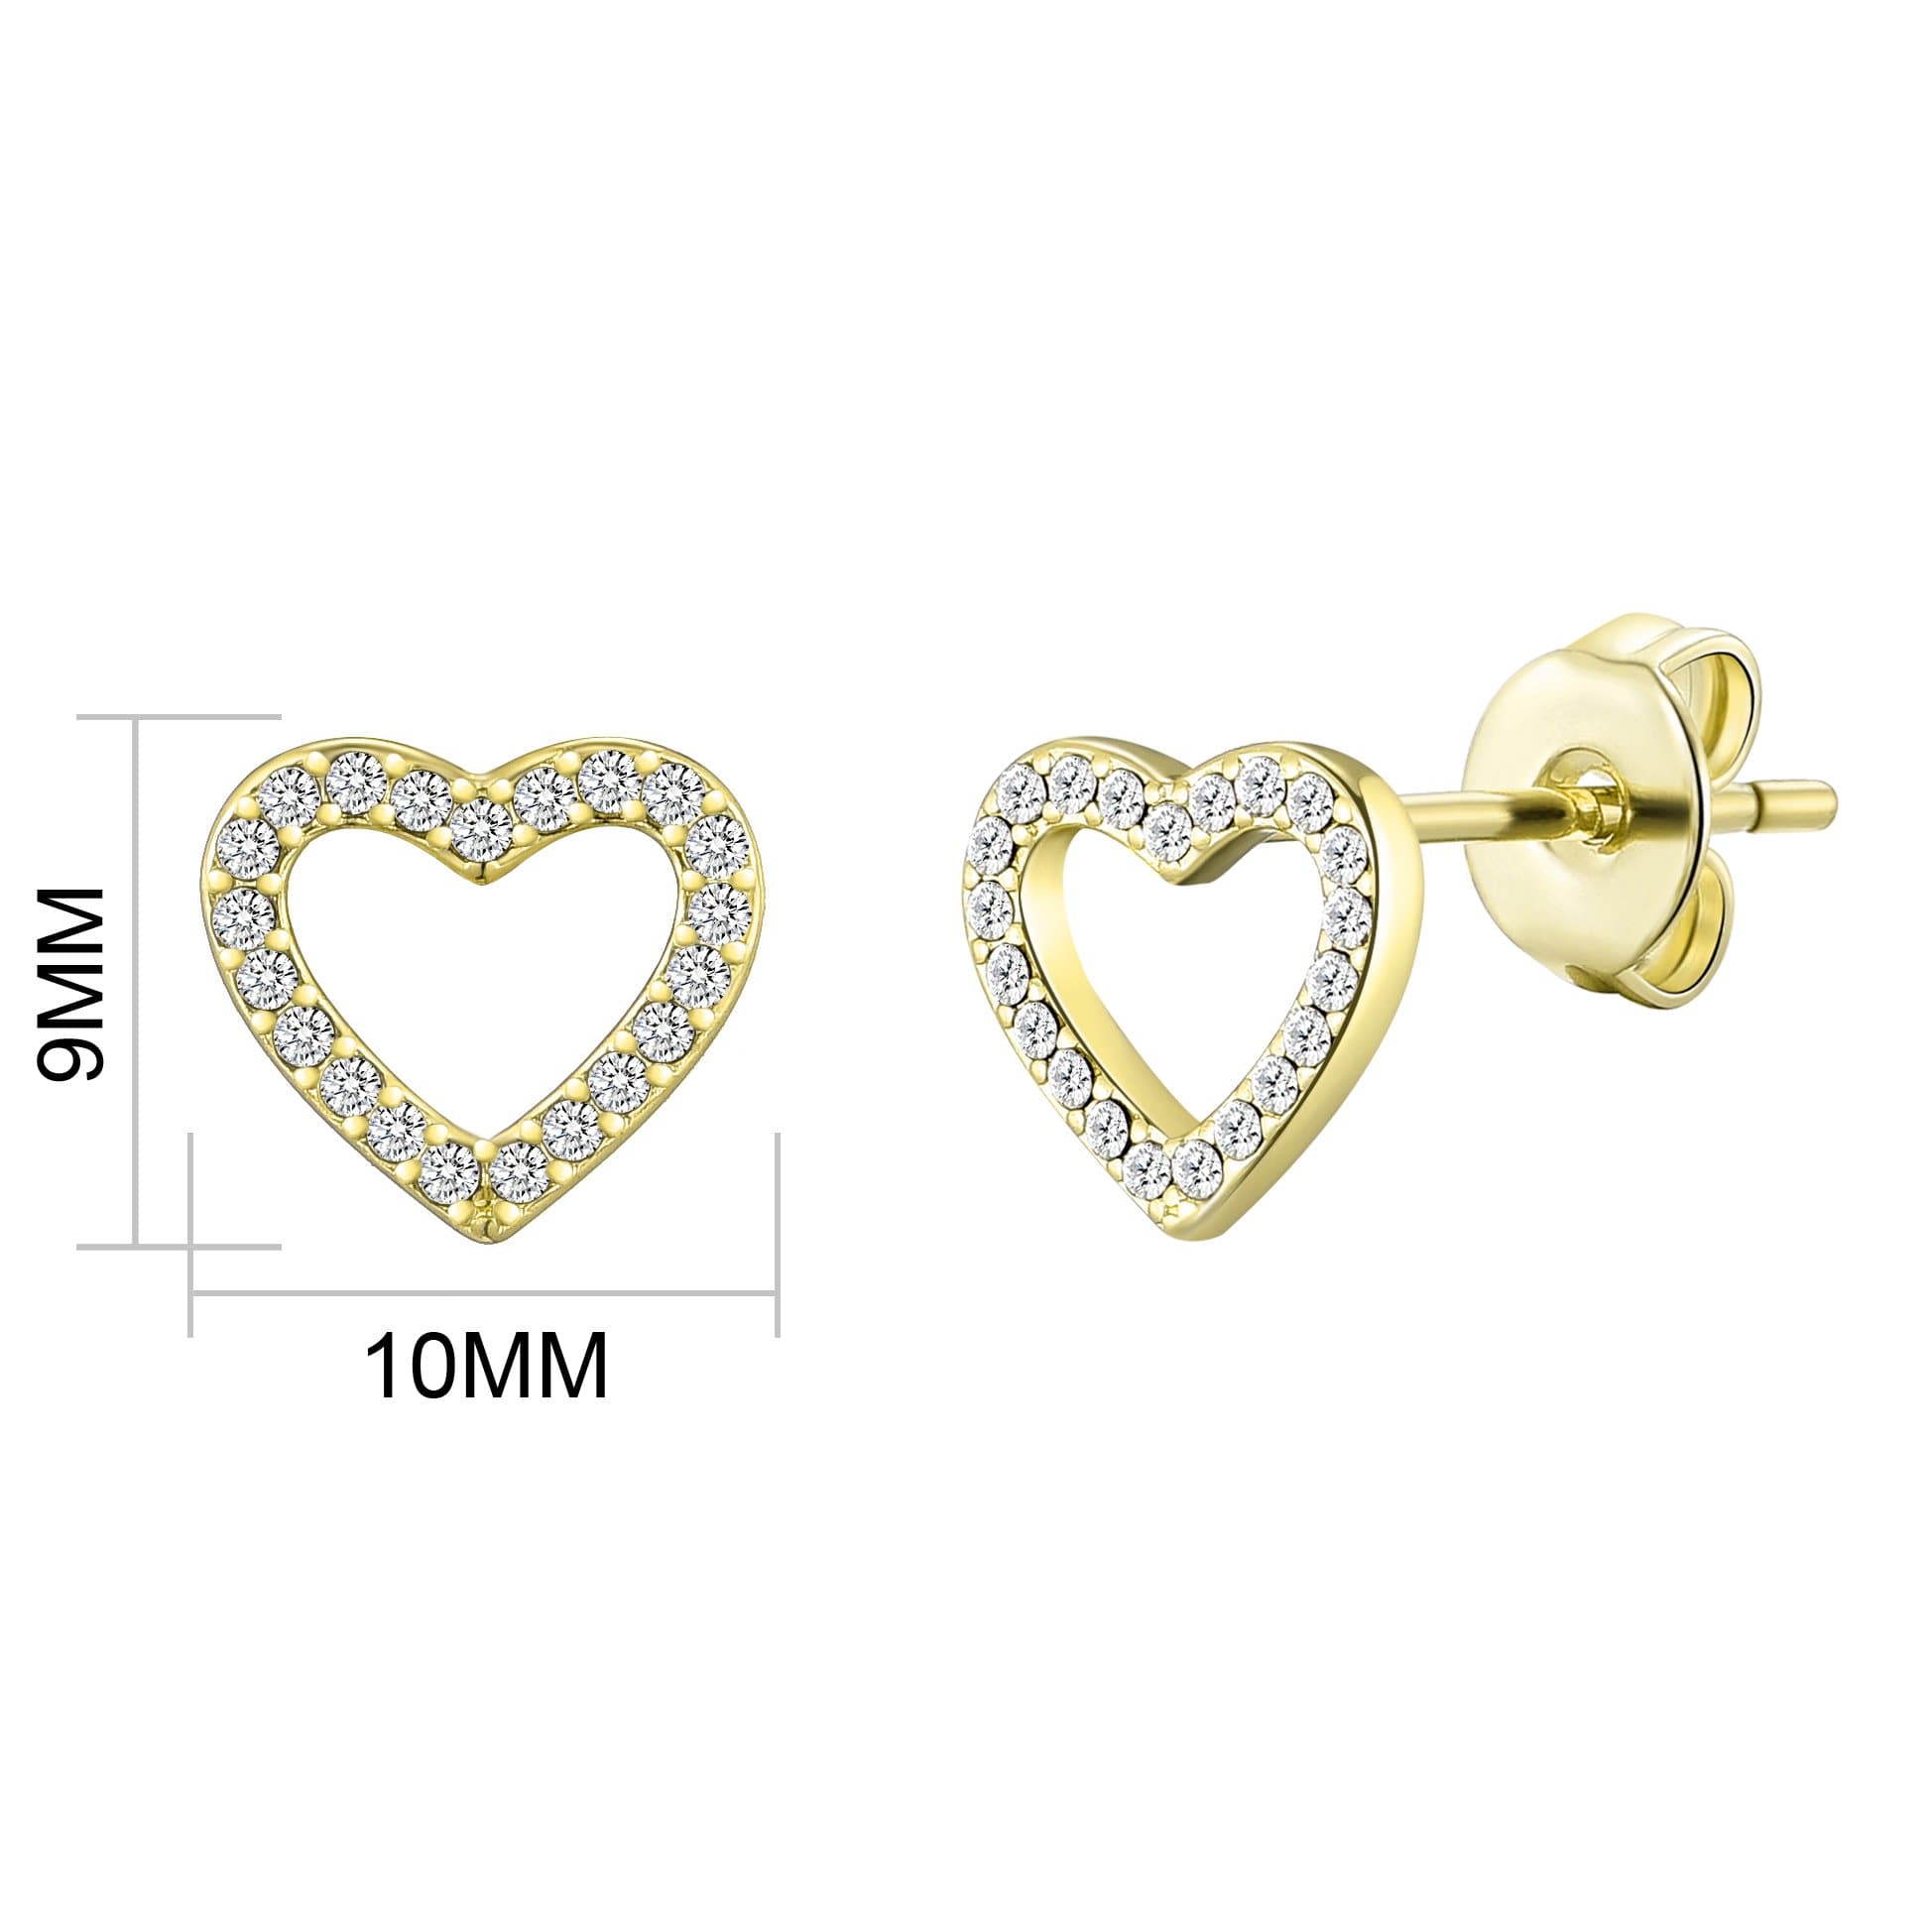 Gold Plated Open Heart Earrings Created with Zircondia® Crystals